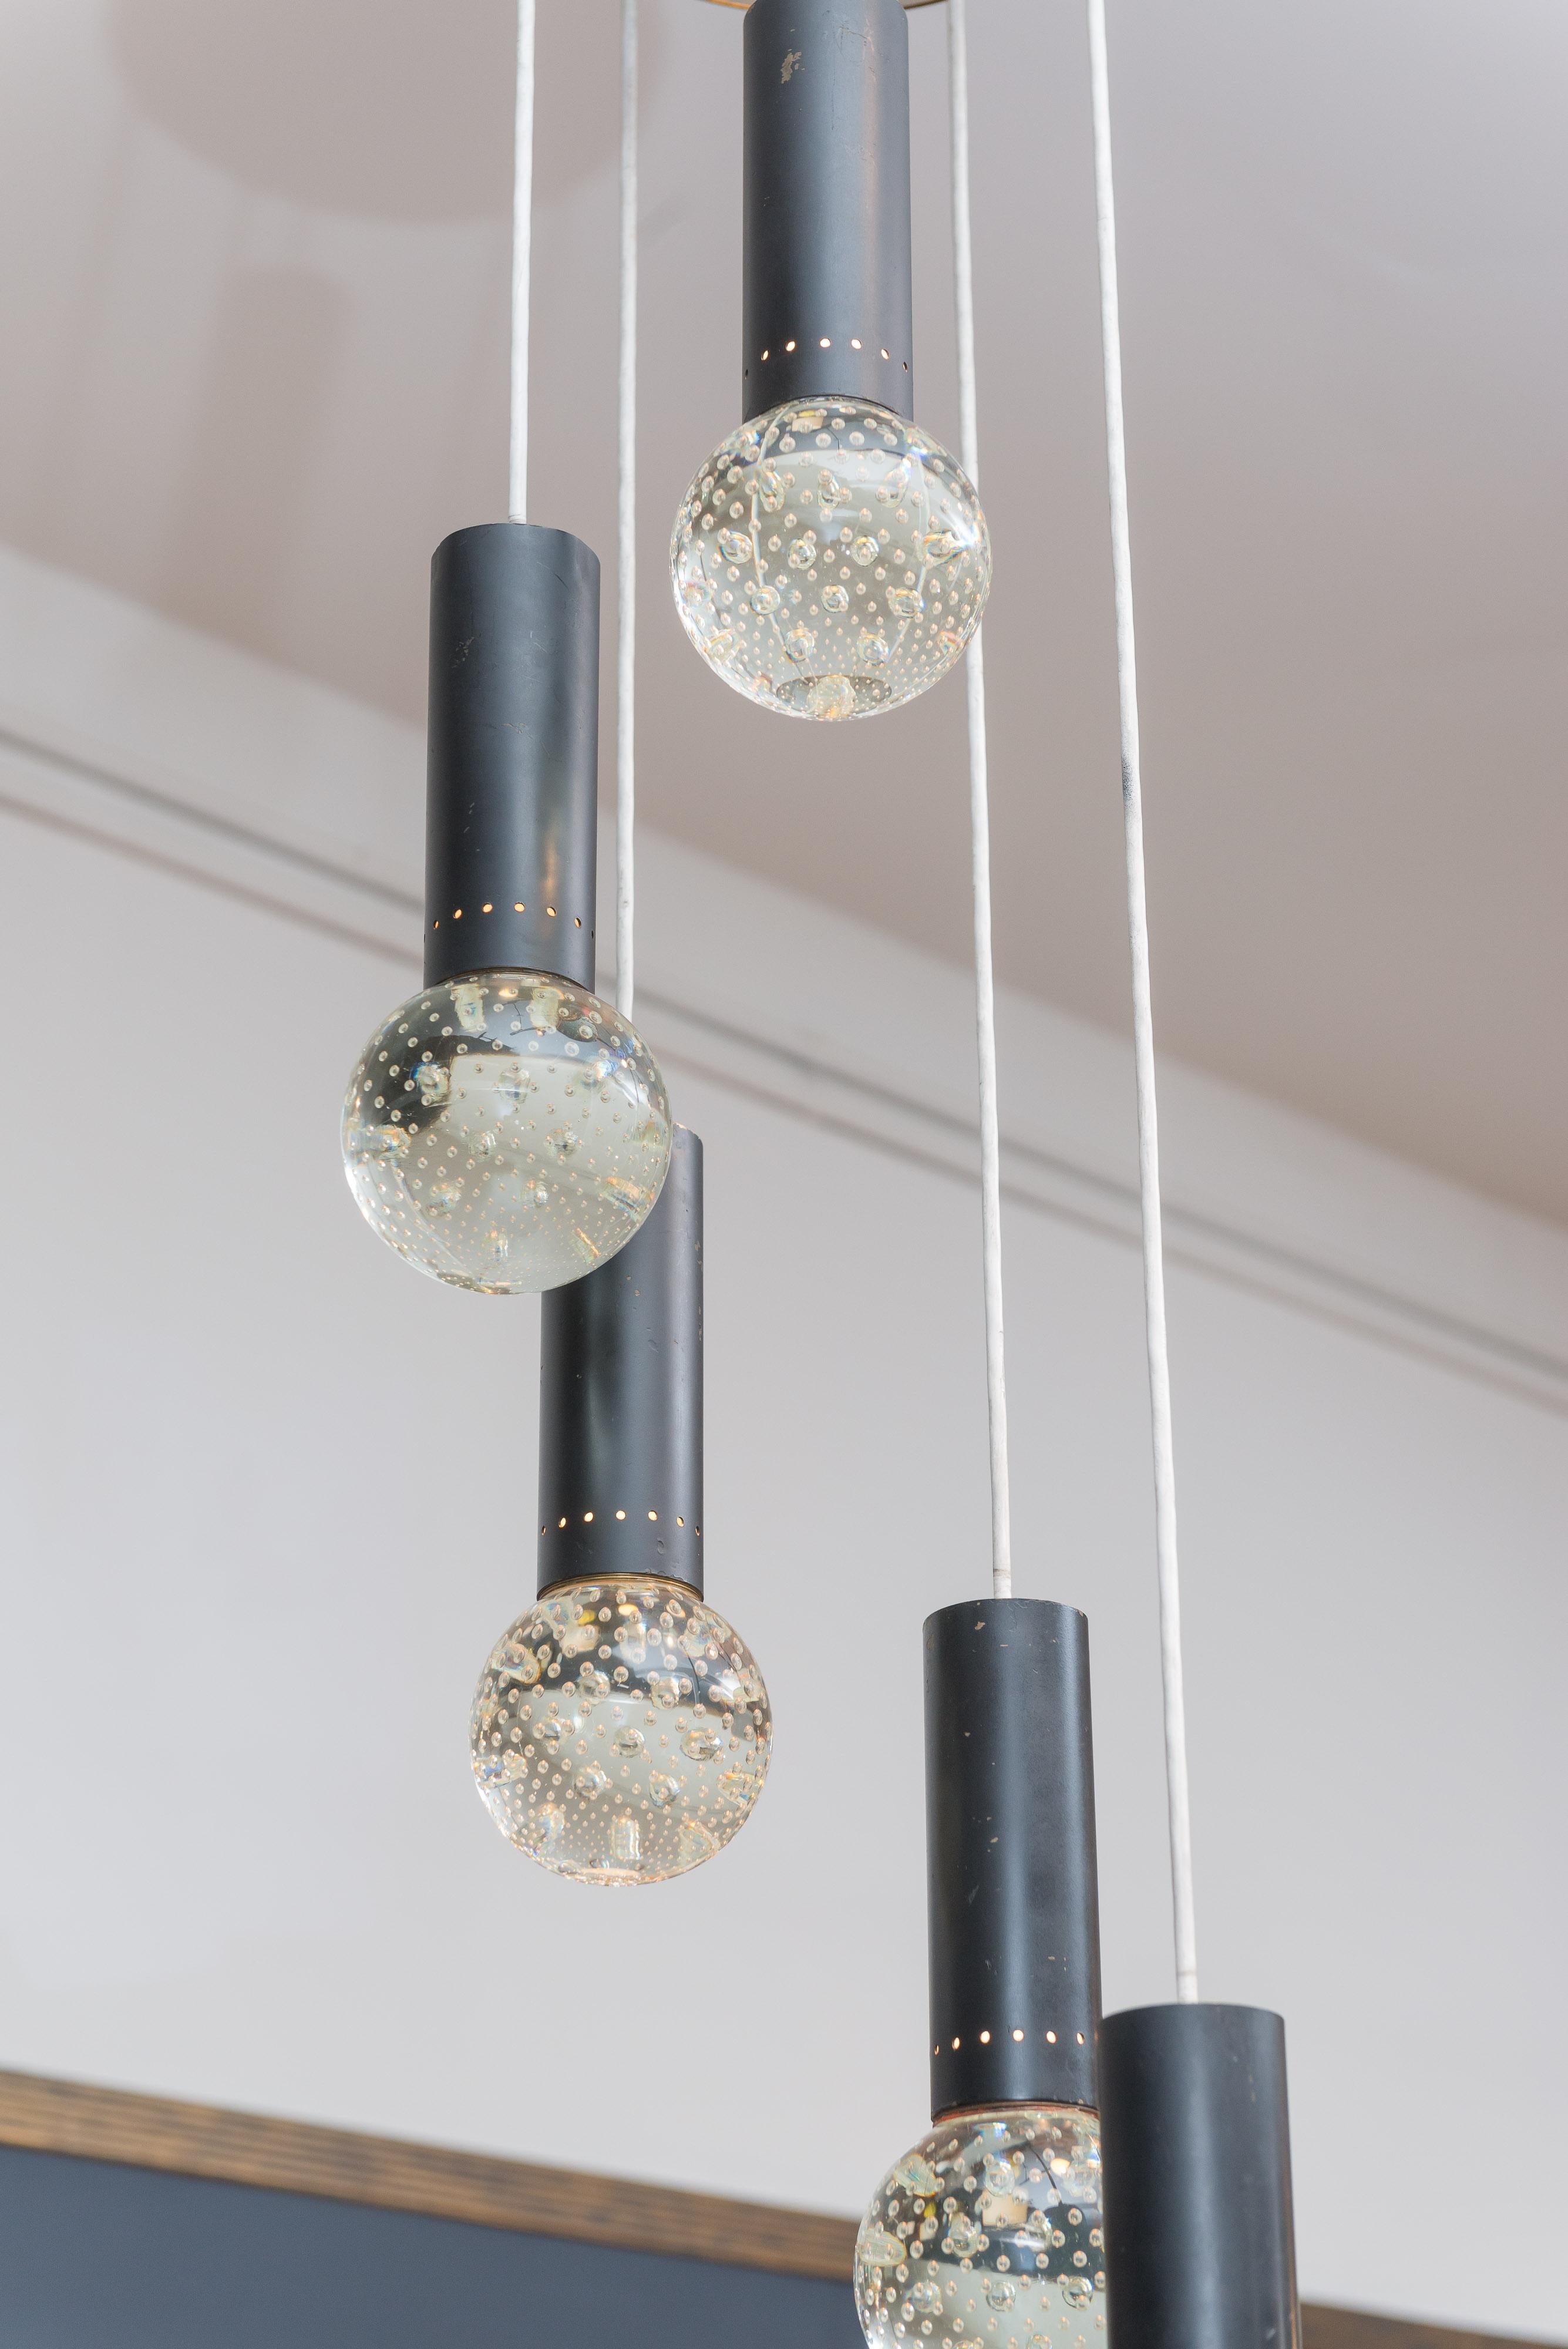 Elegant five-light chandelier designed by Gino Sarfatti and Archimede Seguso, Italy. Five solid glass pendant lights with bubble inclusions that cast off small rays of light, stunning.